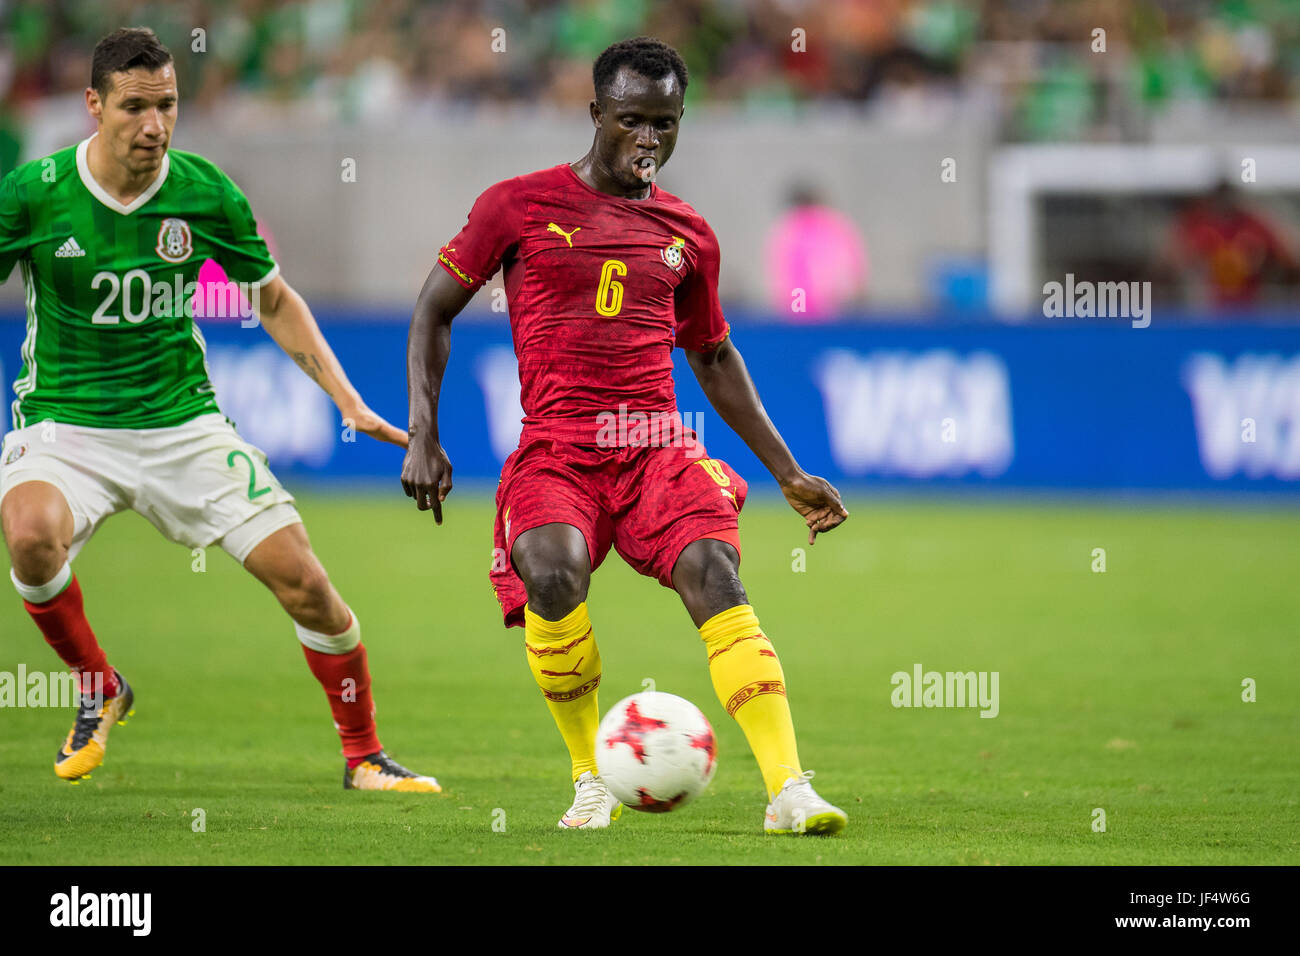 Houston, TX, USA. 28th June, 2017. Ghana midfielder Mohammed Abu (6) controls the ball in front of Mexico midfielder Jesus Duenas (20) during the 2nd half of an international soccer friendly match between Mexico and Ghana at NRG Stadium in Houston, TX. Mexico won the game 1-0.Trask Smith/CSM/Alamy Live News Stock Photo